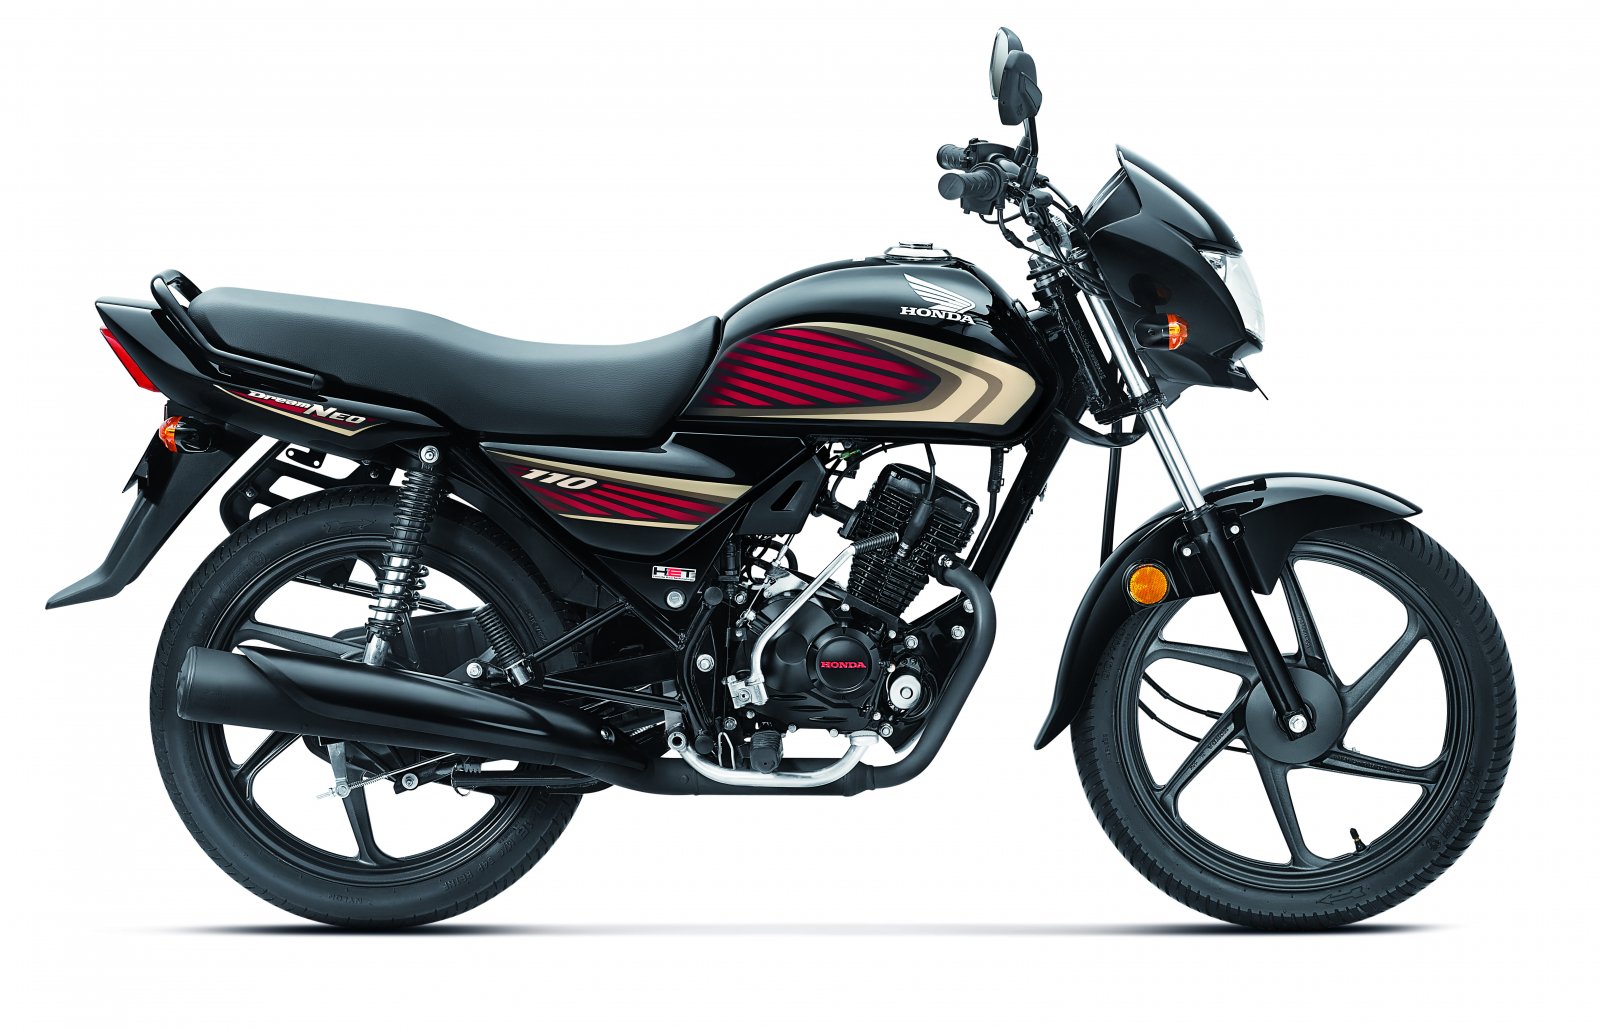 2016 Honda Dream Neo Expected To Carry BS-IV Compliant Engine